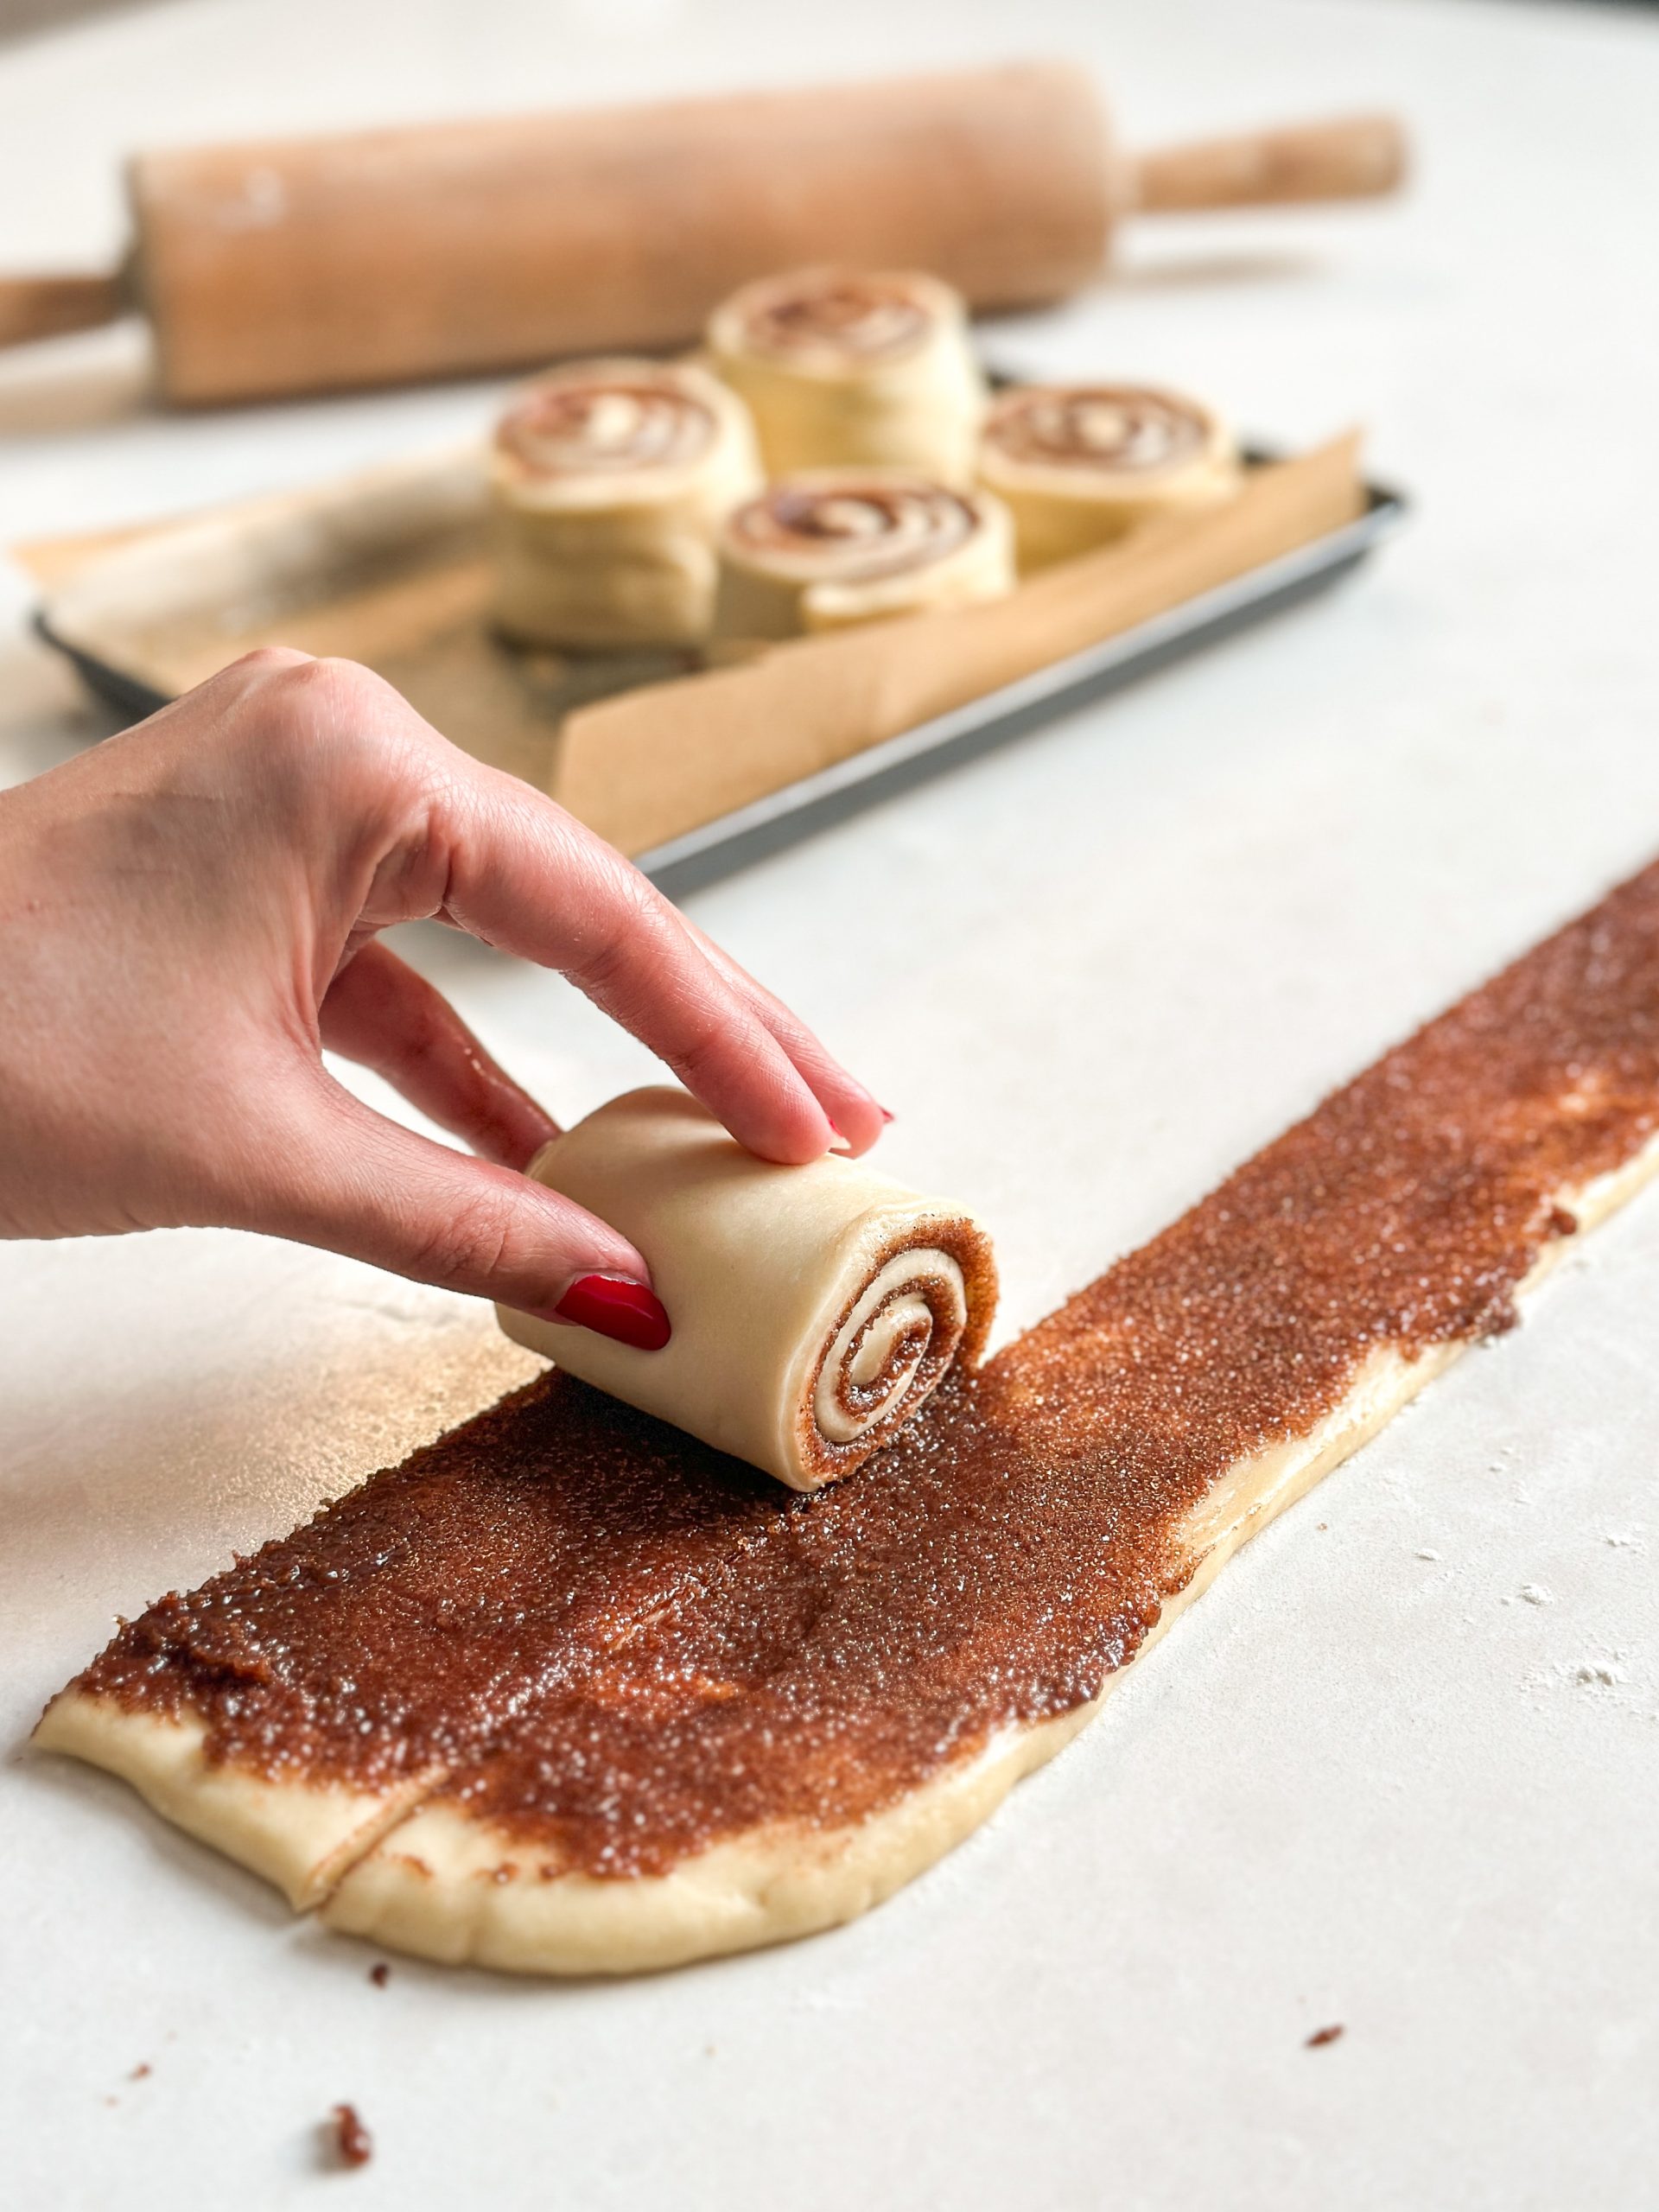 Hand is rolling a strip of dough with cinnamon sugar on it into a neatly rolled cinnamon roll